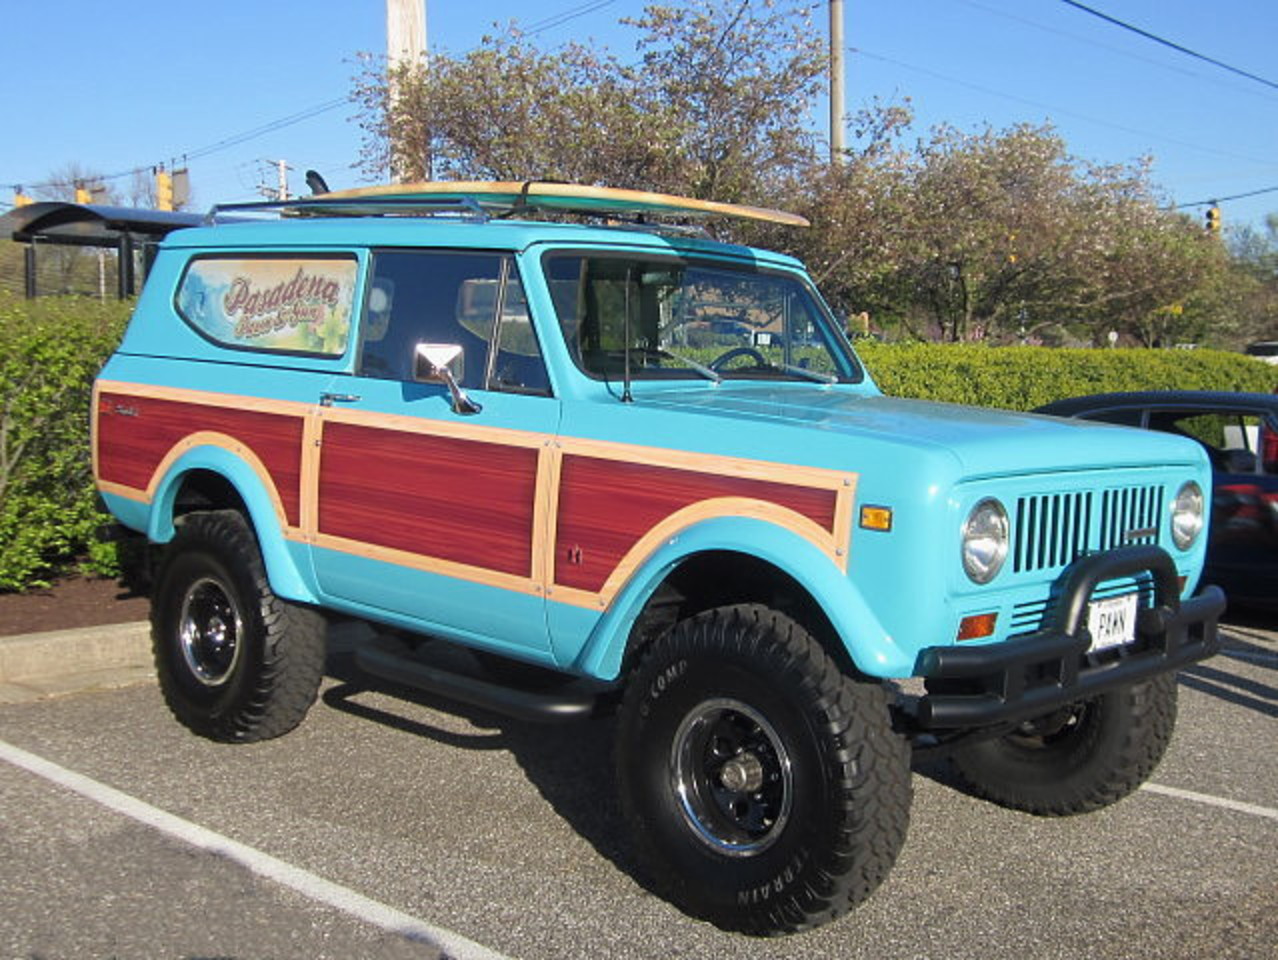 1973 International Scout II | Flickr - Photo Sharing!